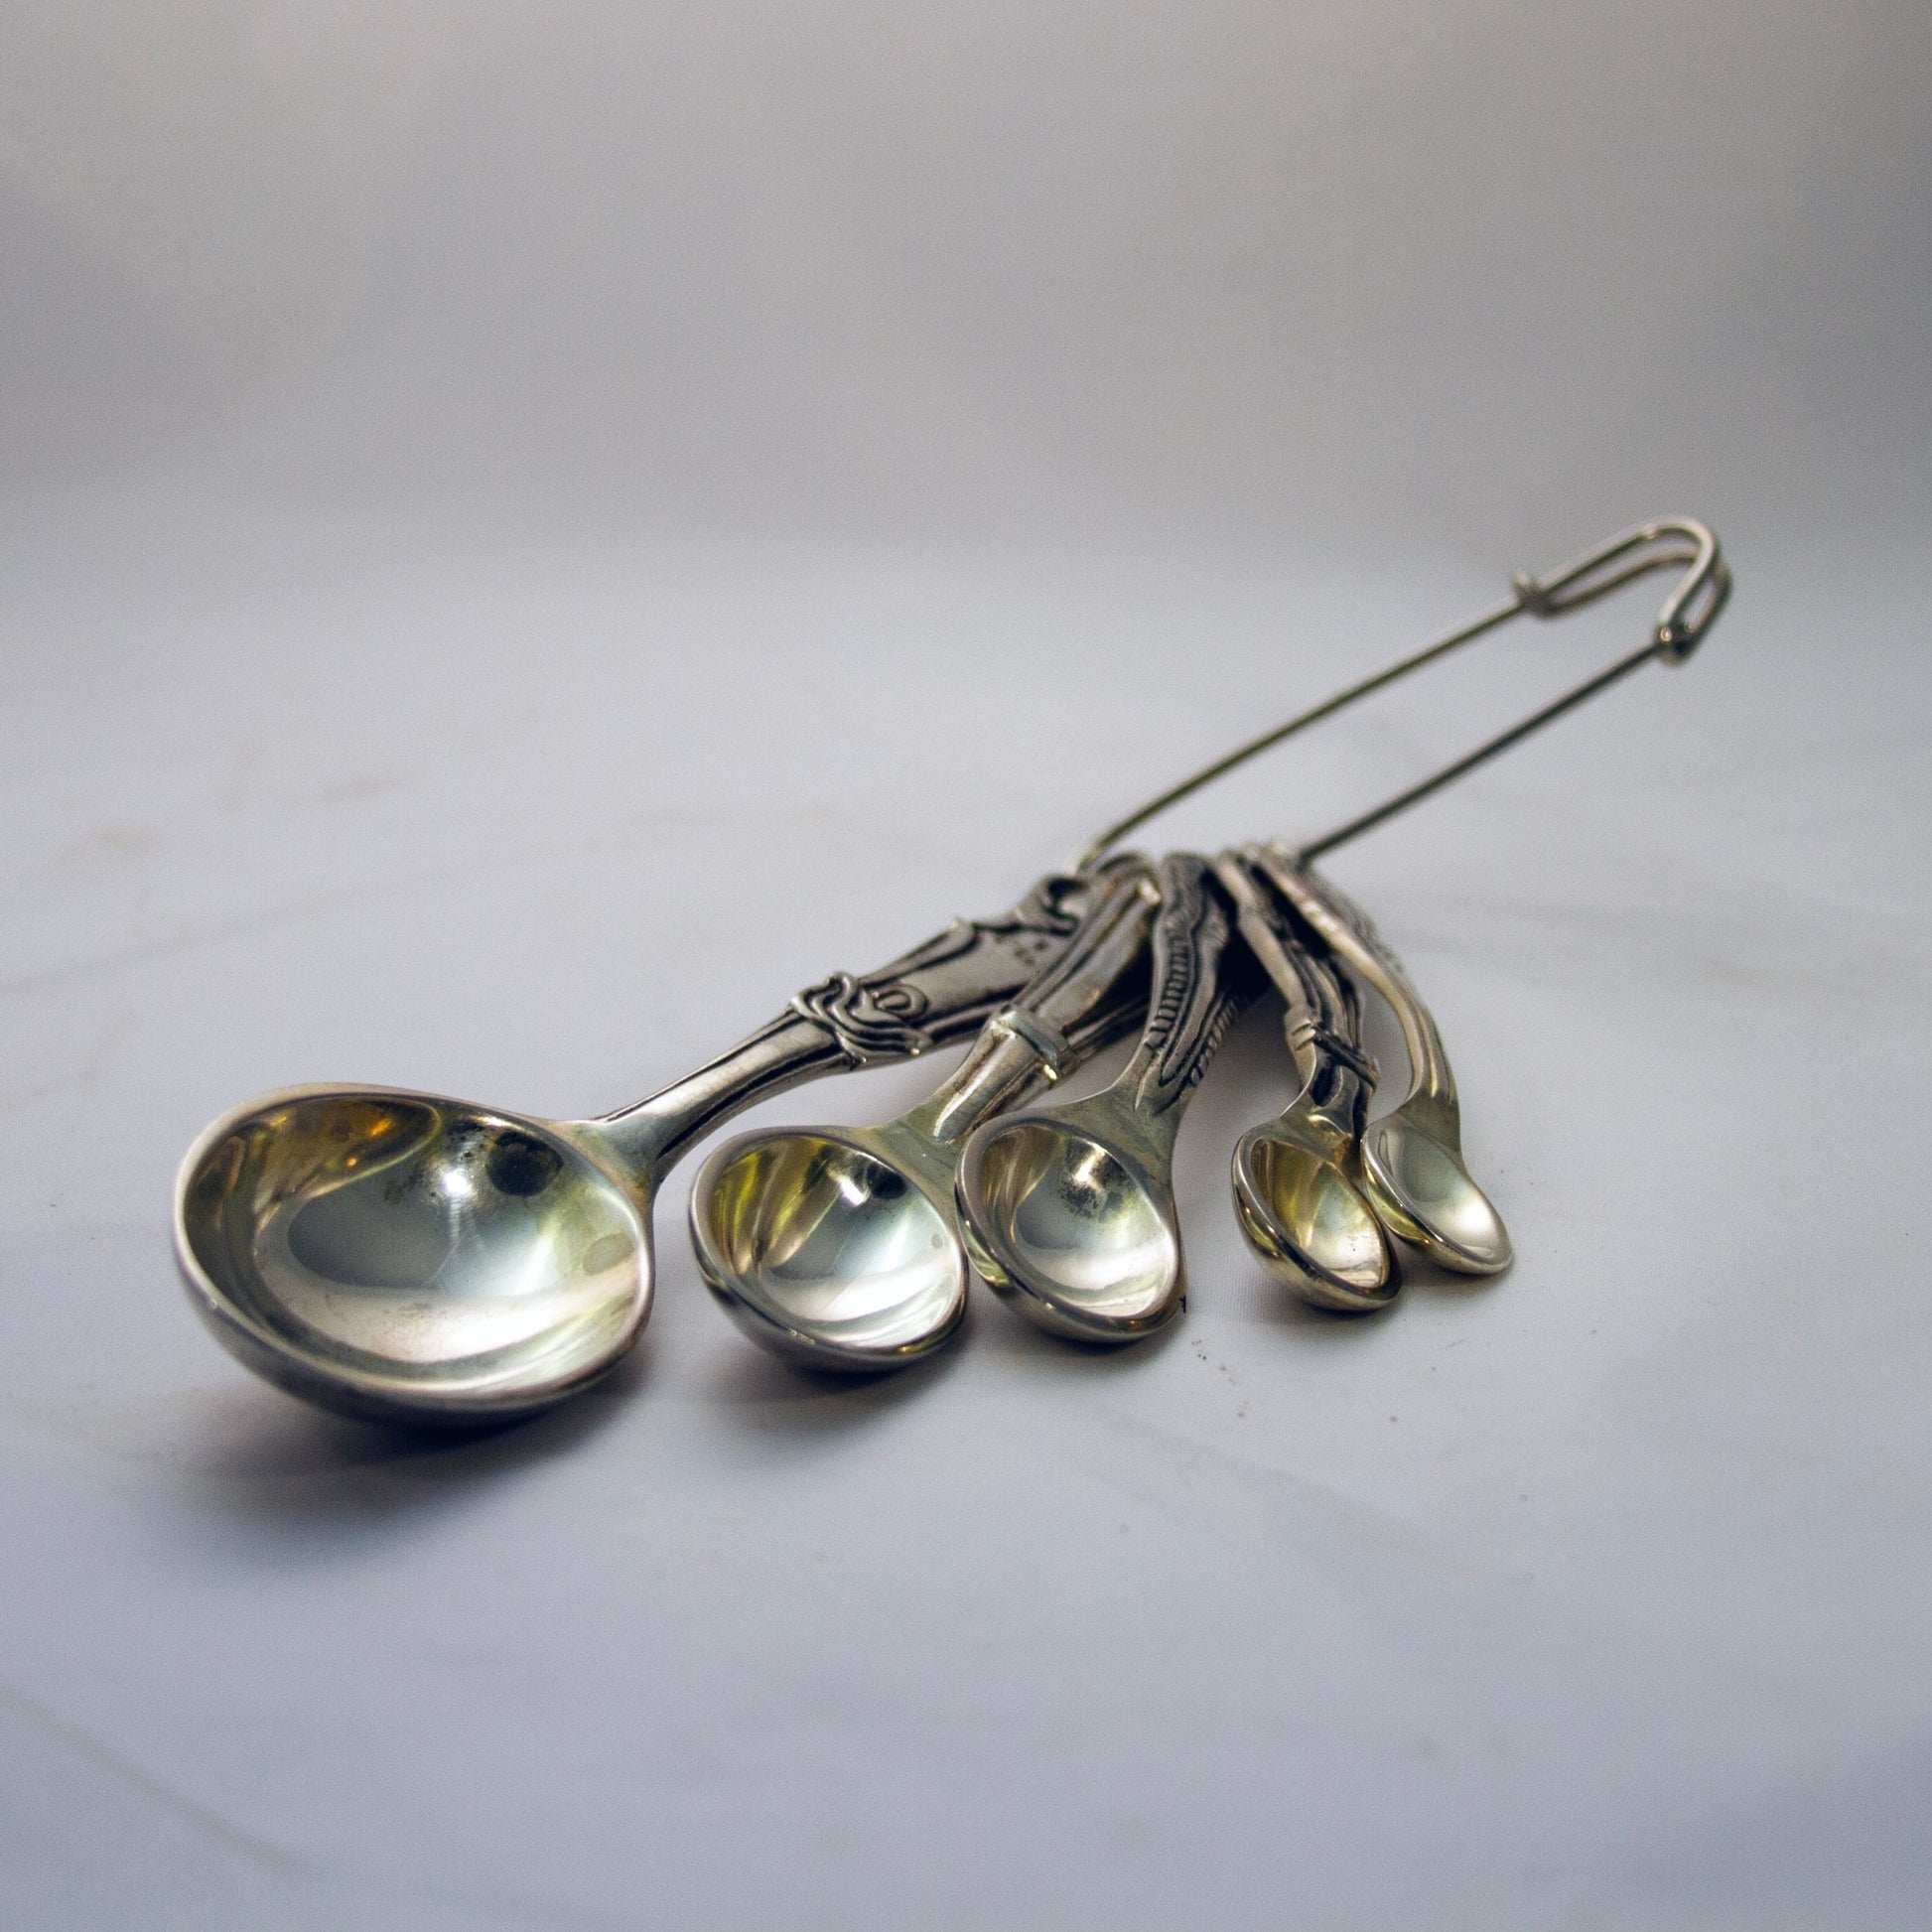 ANTHROPOLOGIE Five-Piece Measuring Spoon Set Attached on Safety Pin Holder